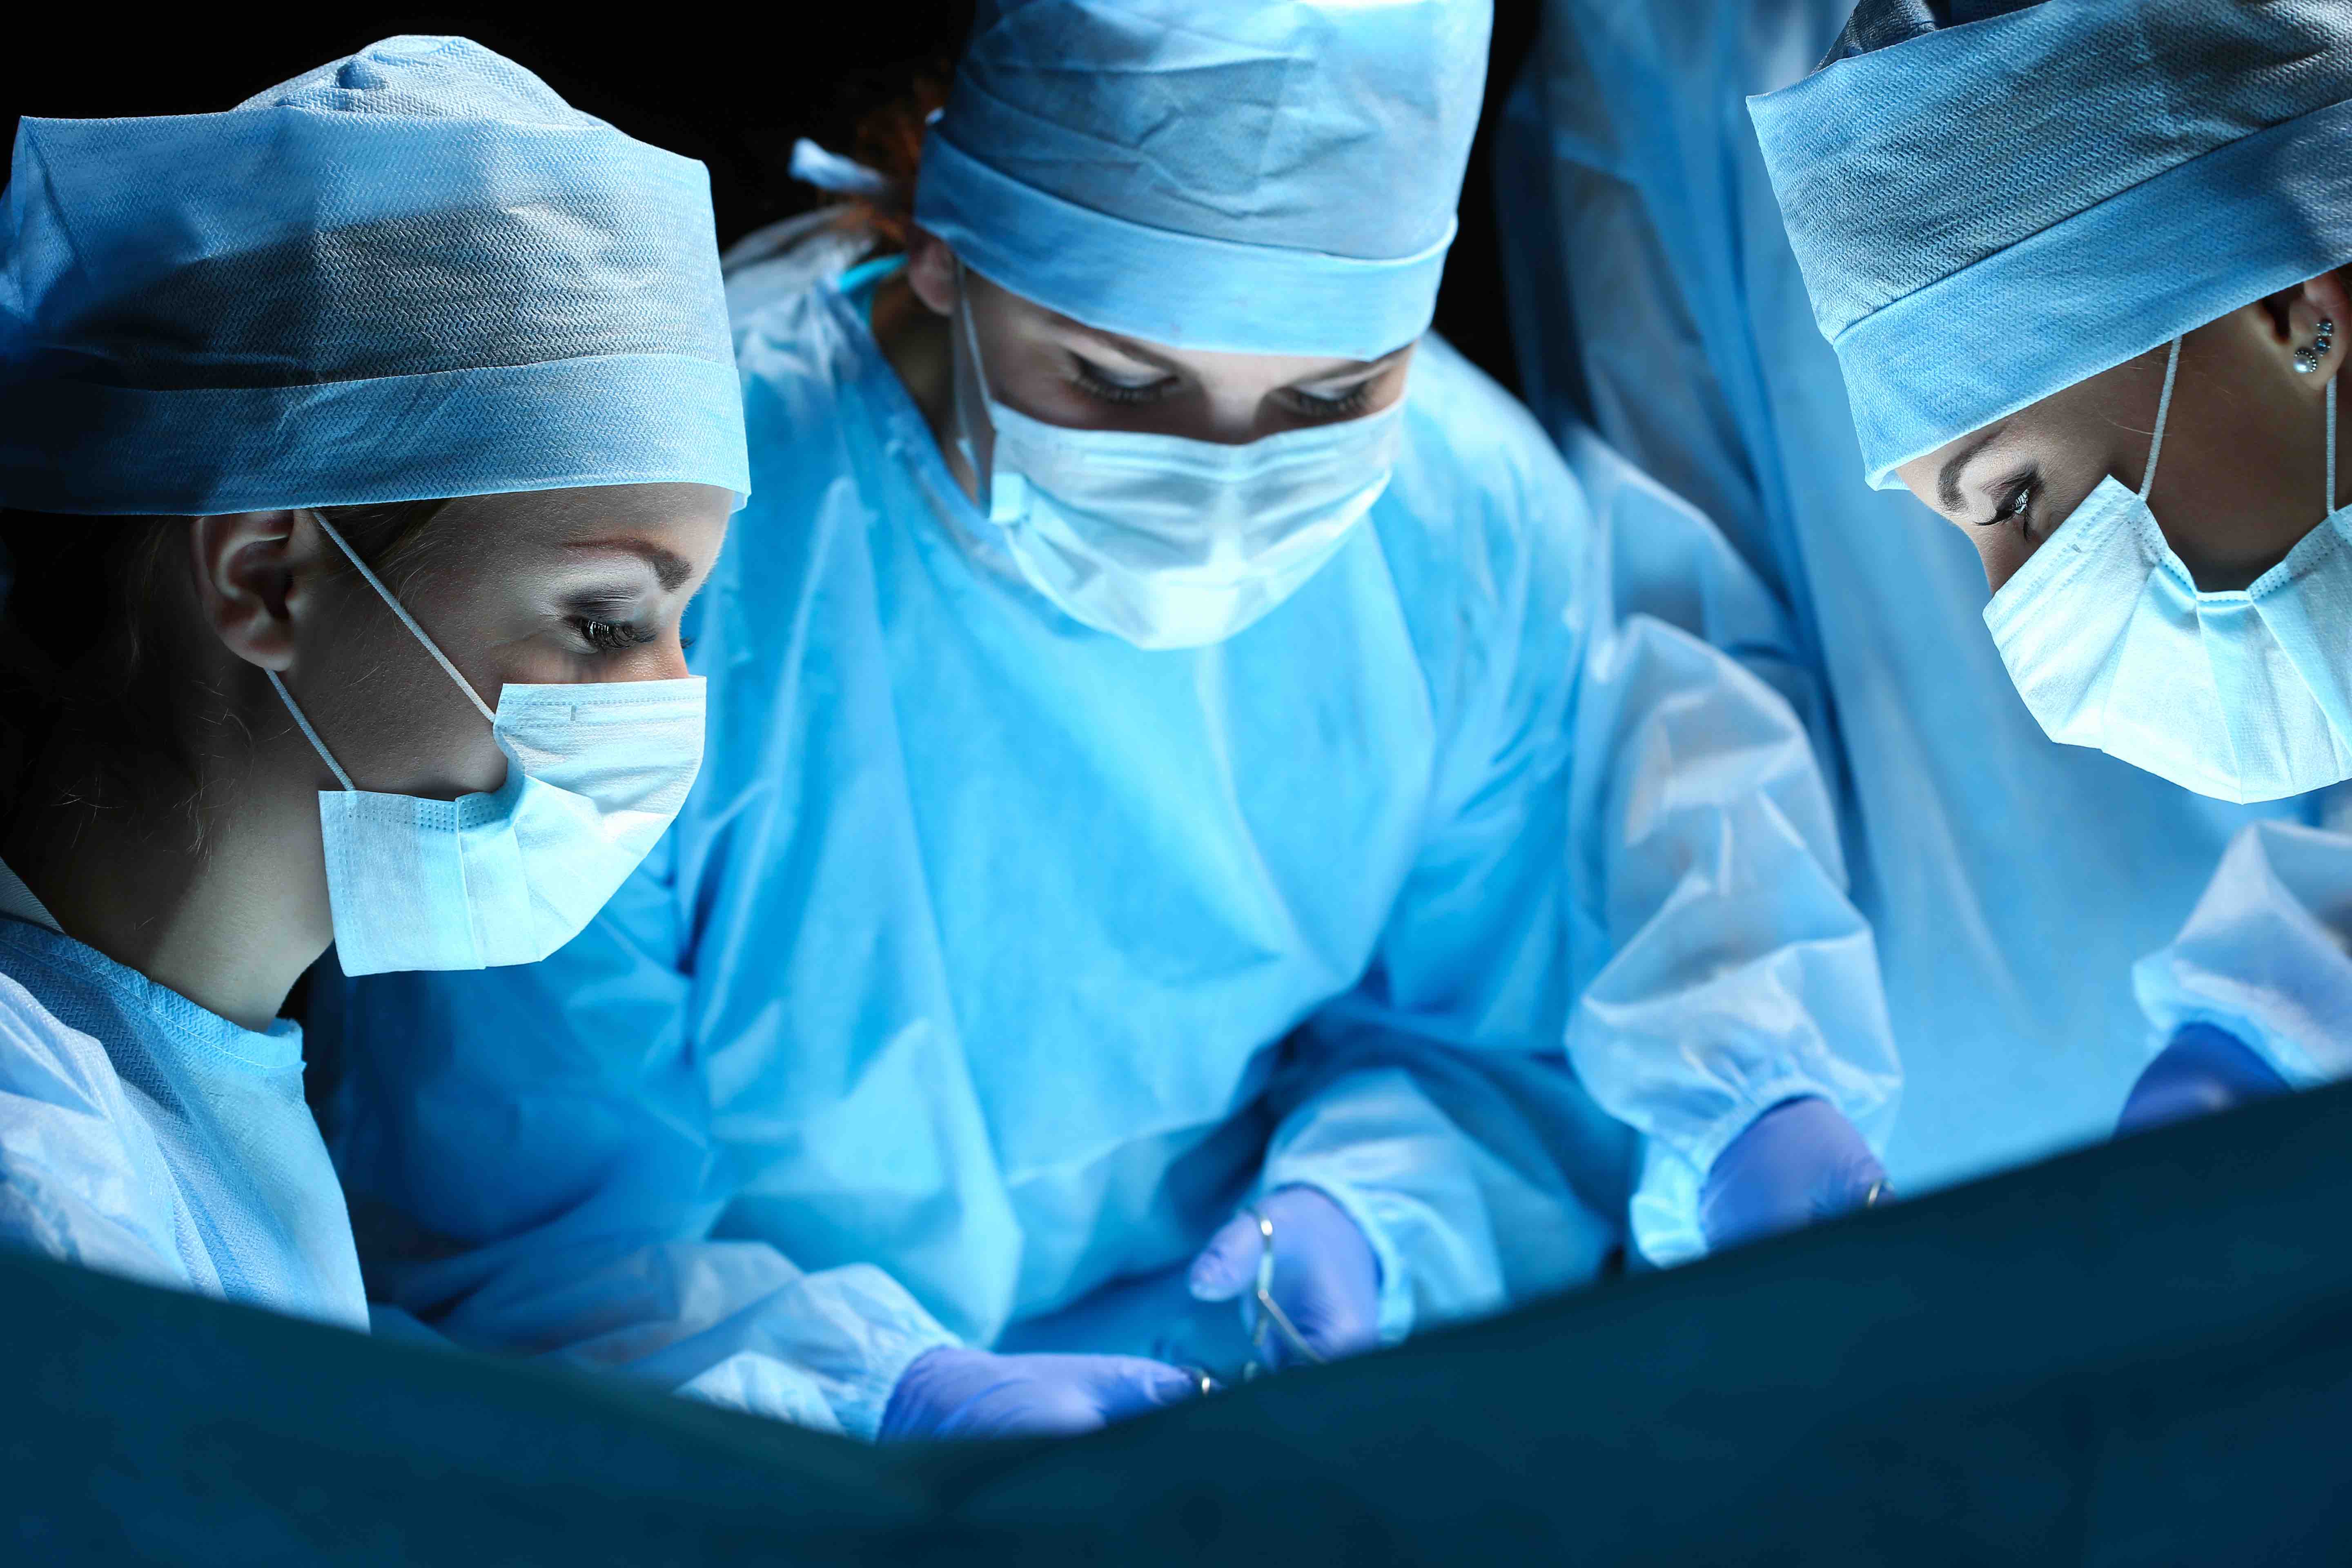 Surgeons in operating theatre 